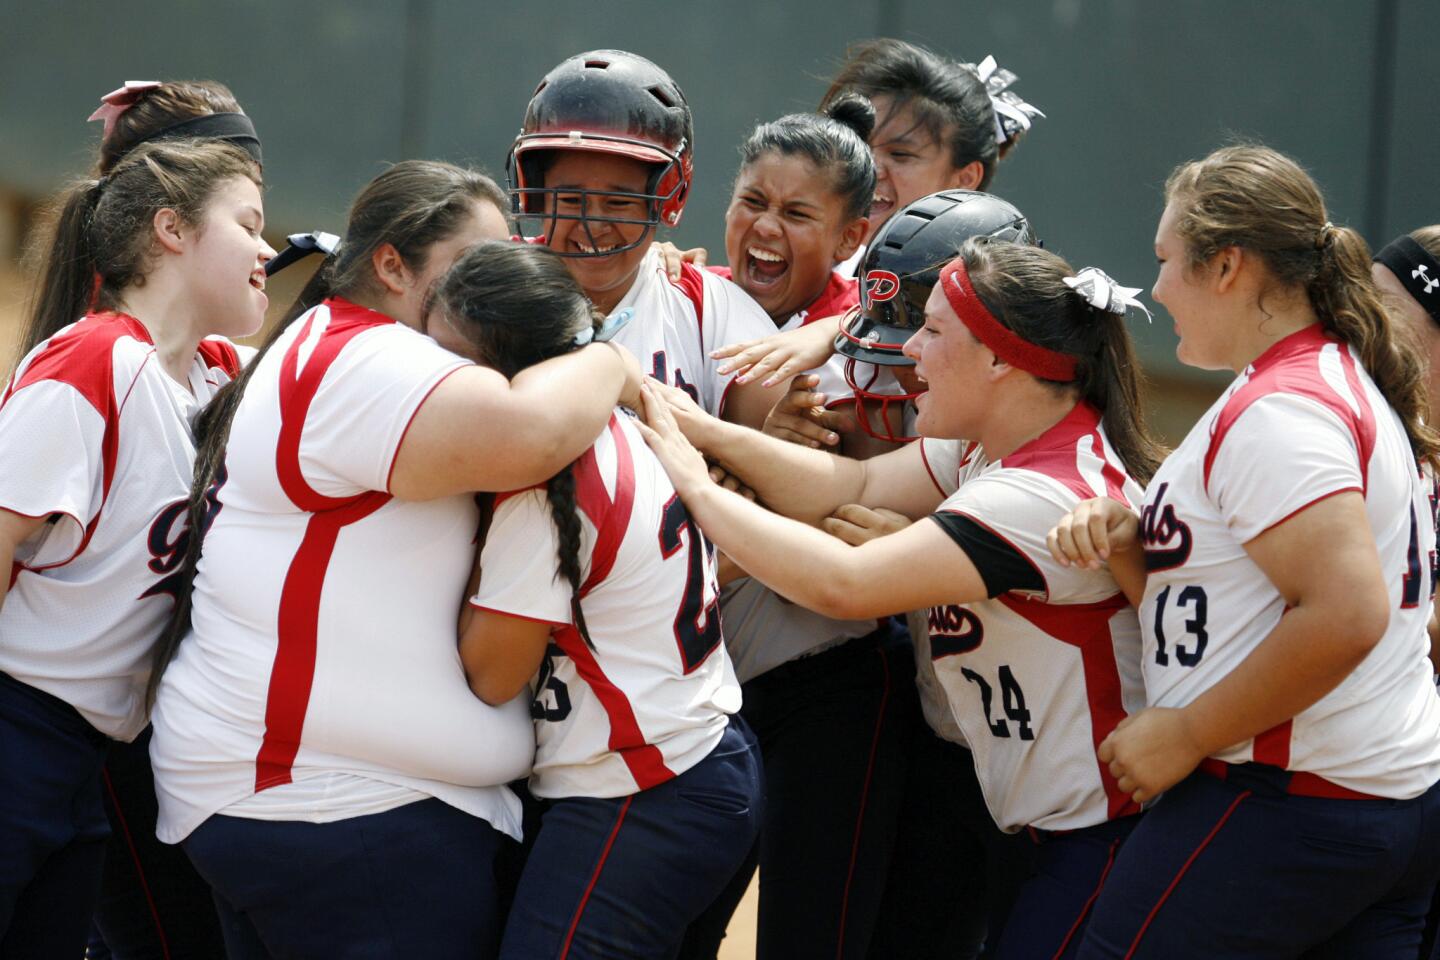 Bell-Jeff's softball team rejoices after Monique Ladini makes a home run during the CIF Division VI softball championship game against Mary Star, which took place at Deanna Manning Stadium in Irvine on Saturday, June 1, 2013. Bell-Jeff wins the finals against Mary Star 8-4.